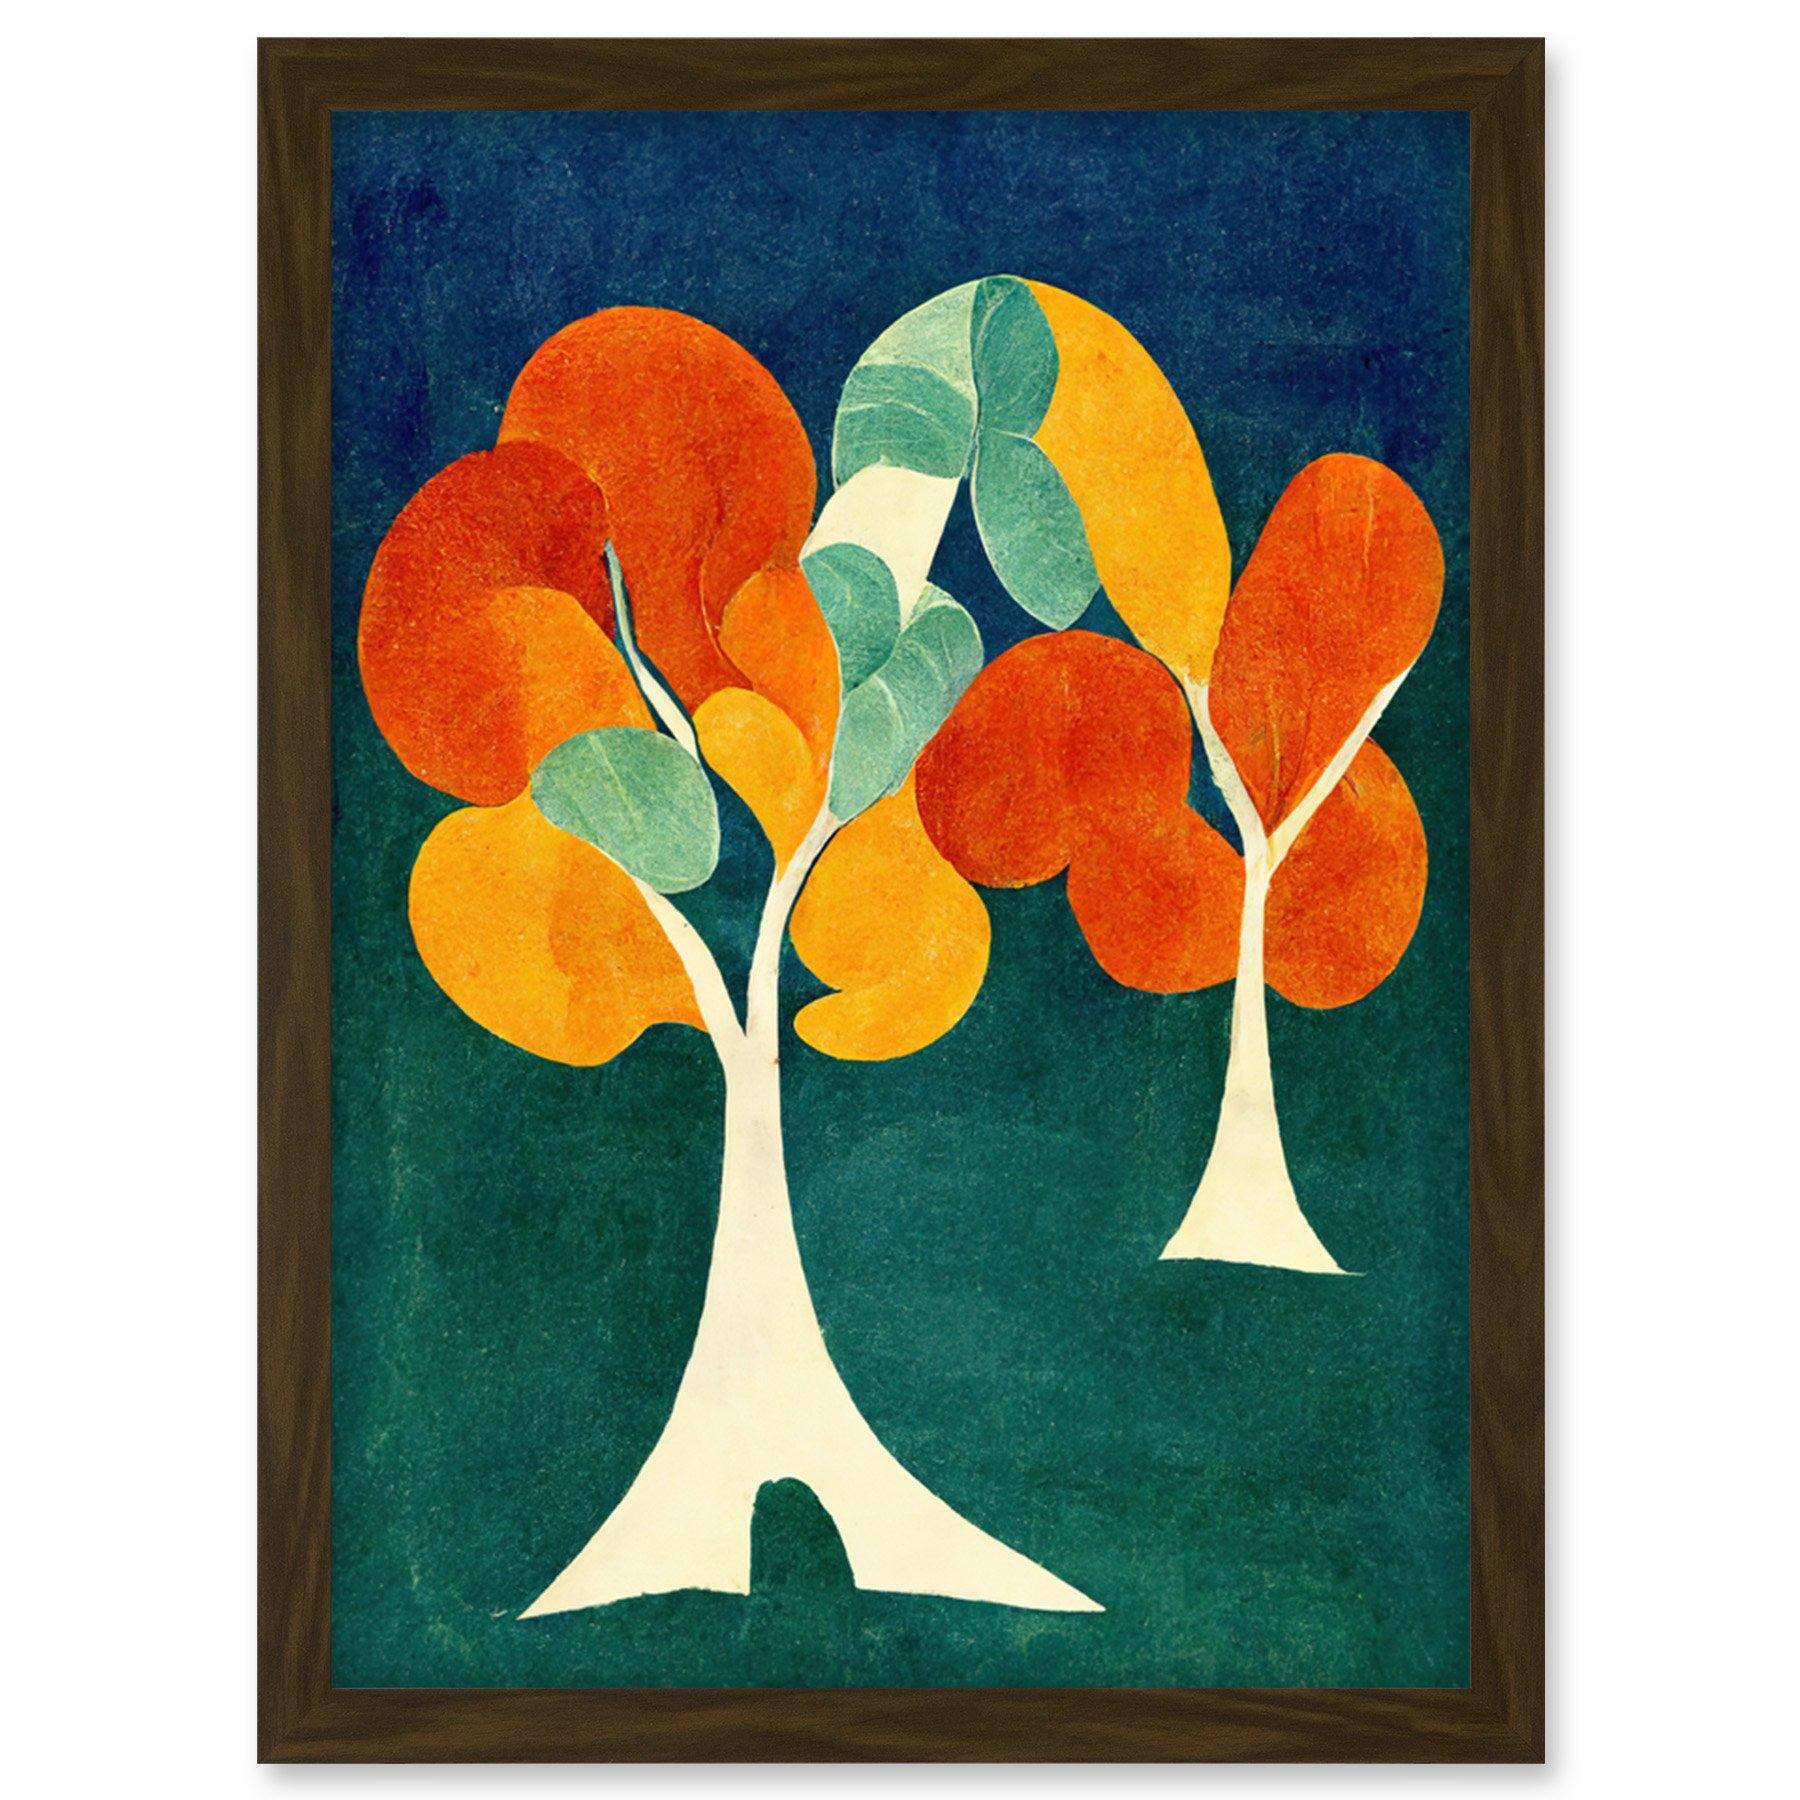 Minimalistic Henri Matisse Style Autumn Fall Trees Abstract Artwork Framed Wall Art Print A4 - image 1